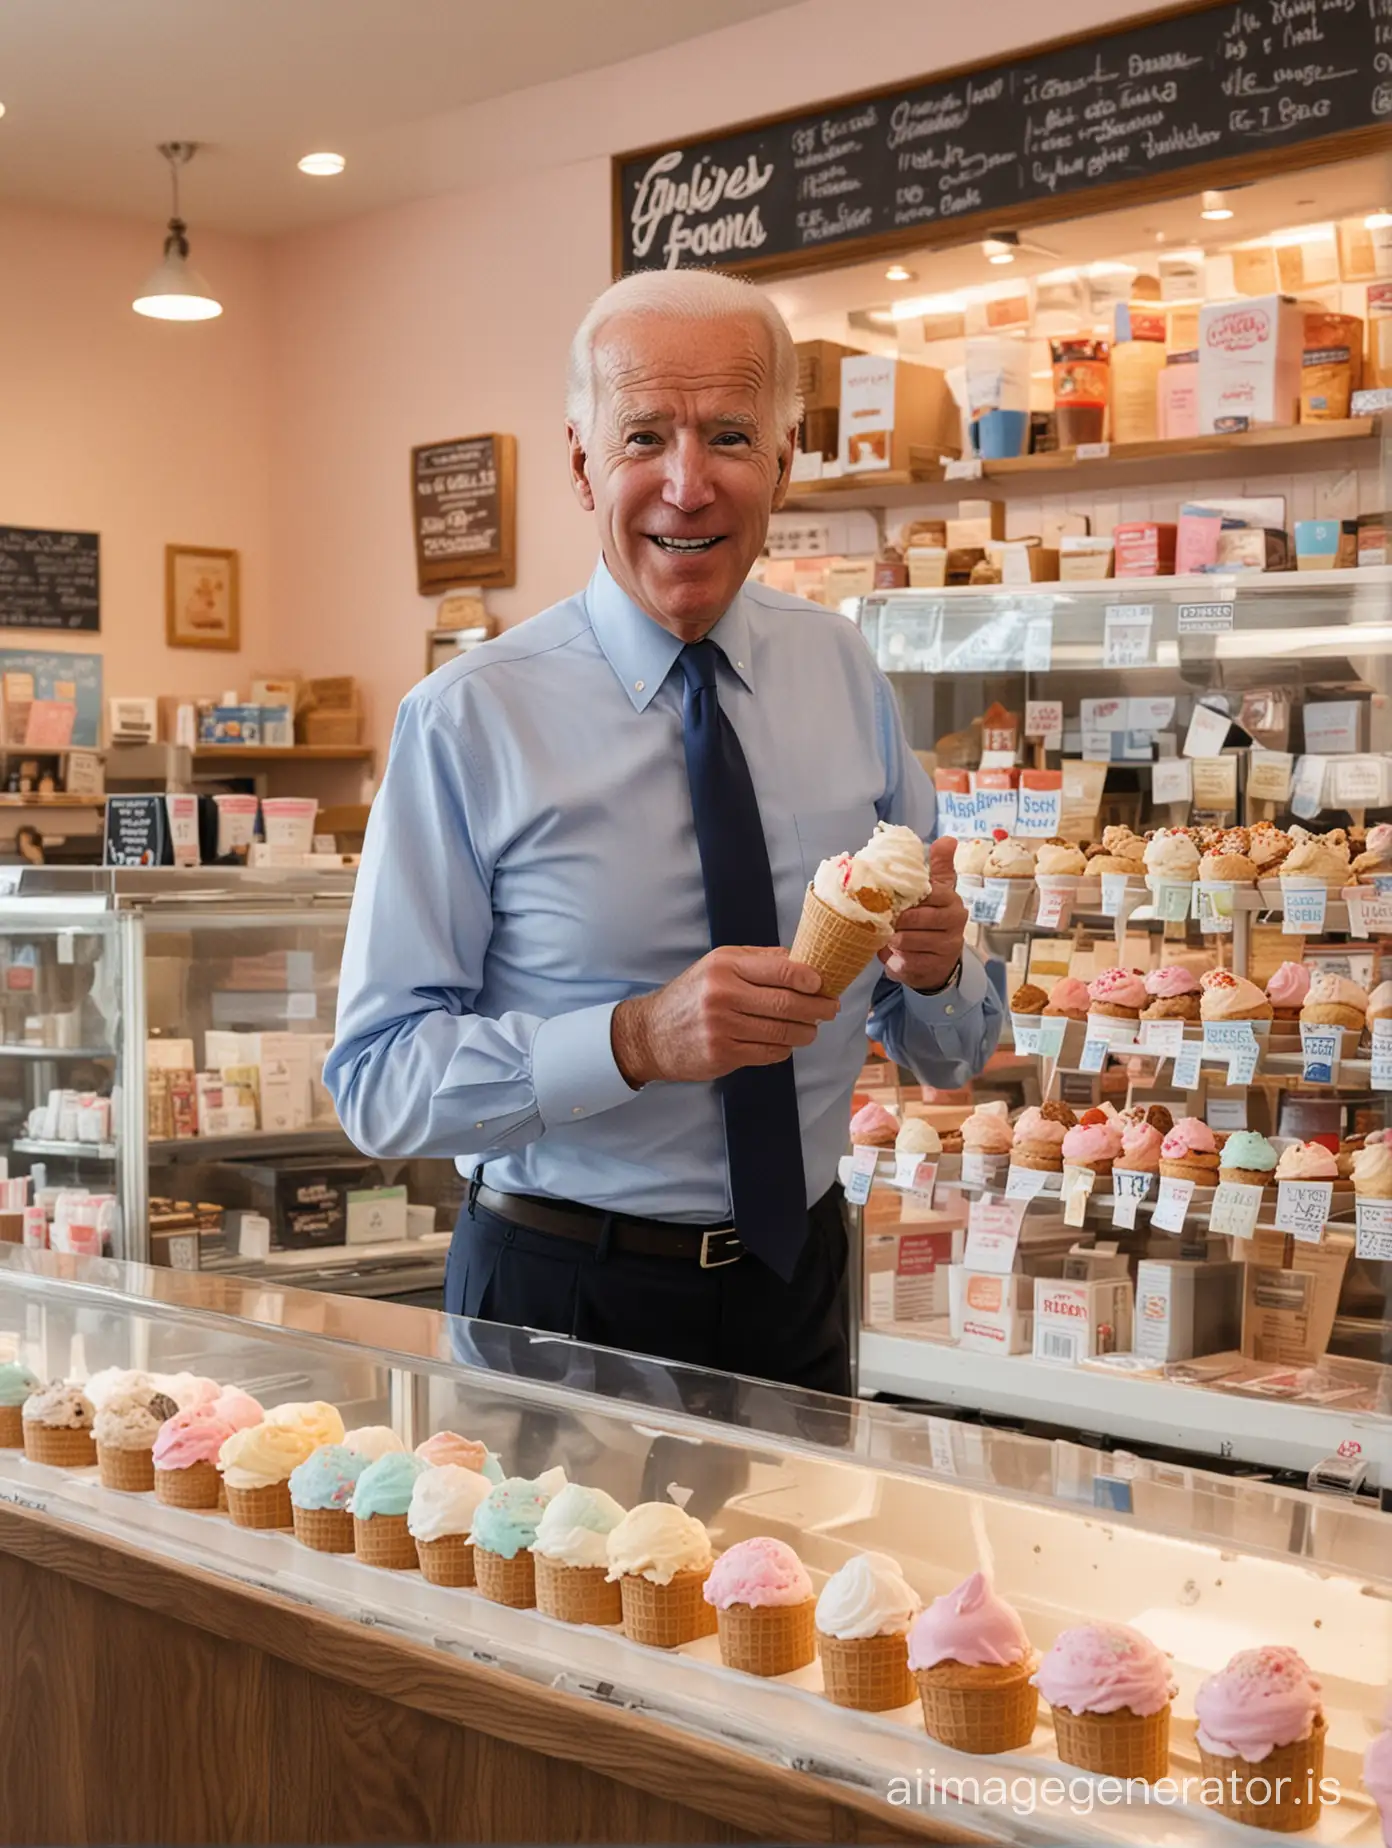 Joe Biden stands in an ice cream store and is selling ice cream